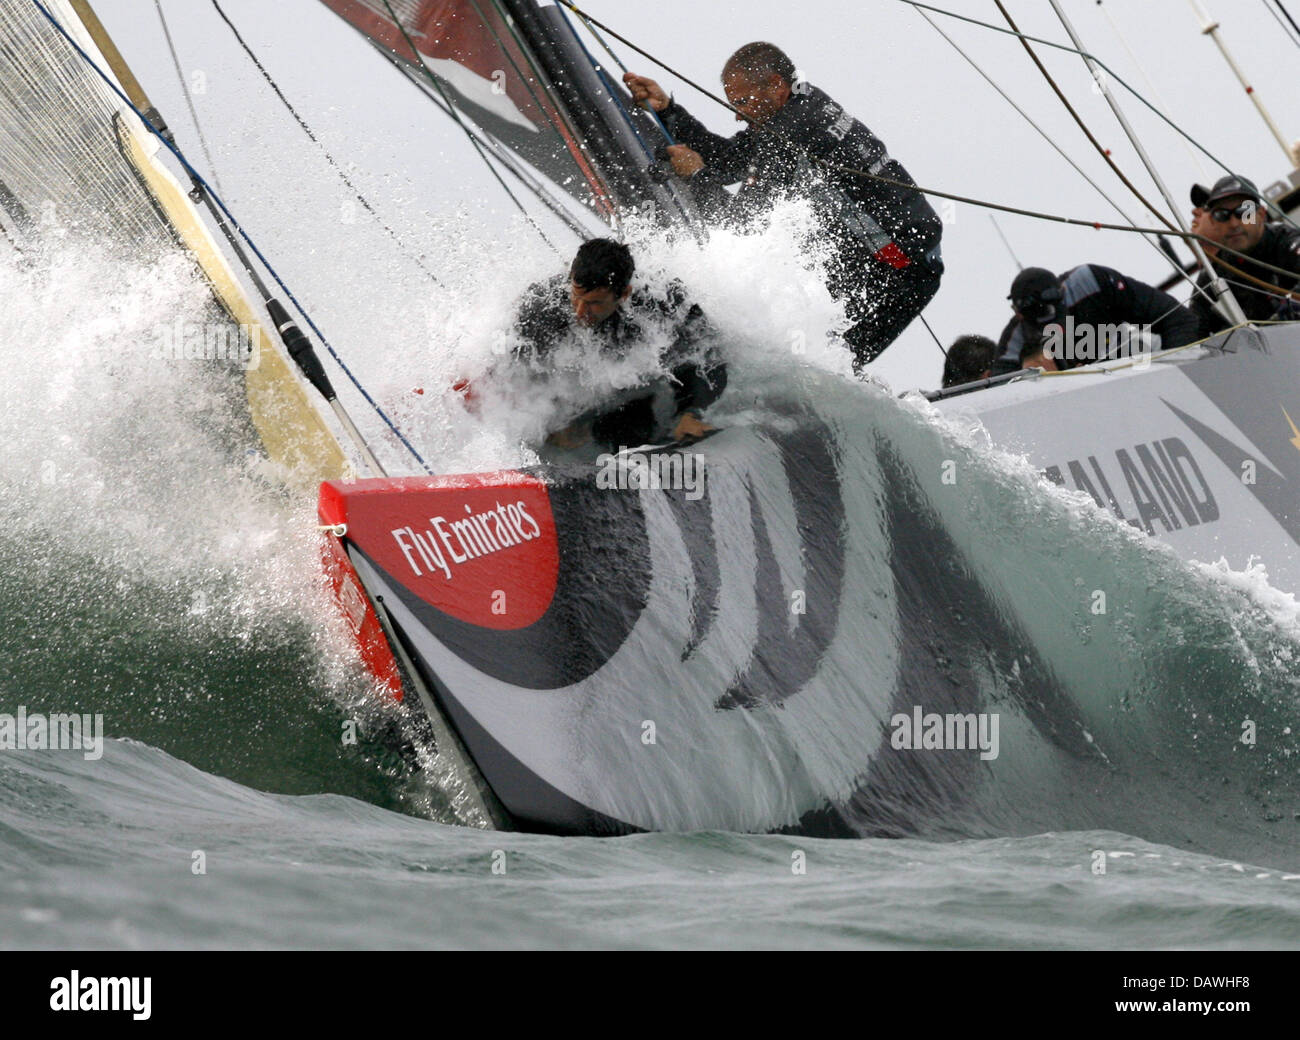 Emirates Team New Zealand shown in action during the Flight 7 race